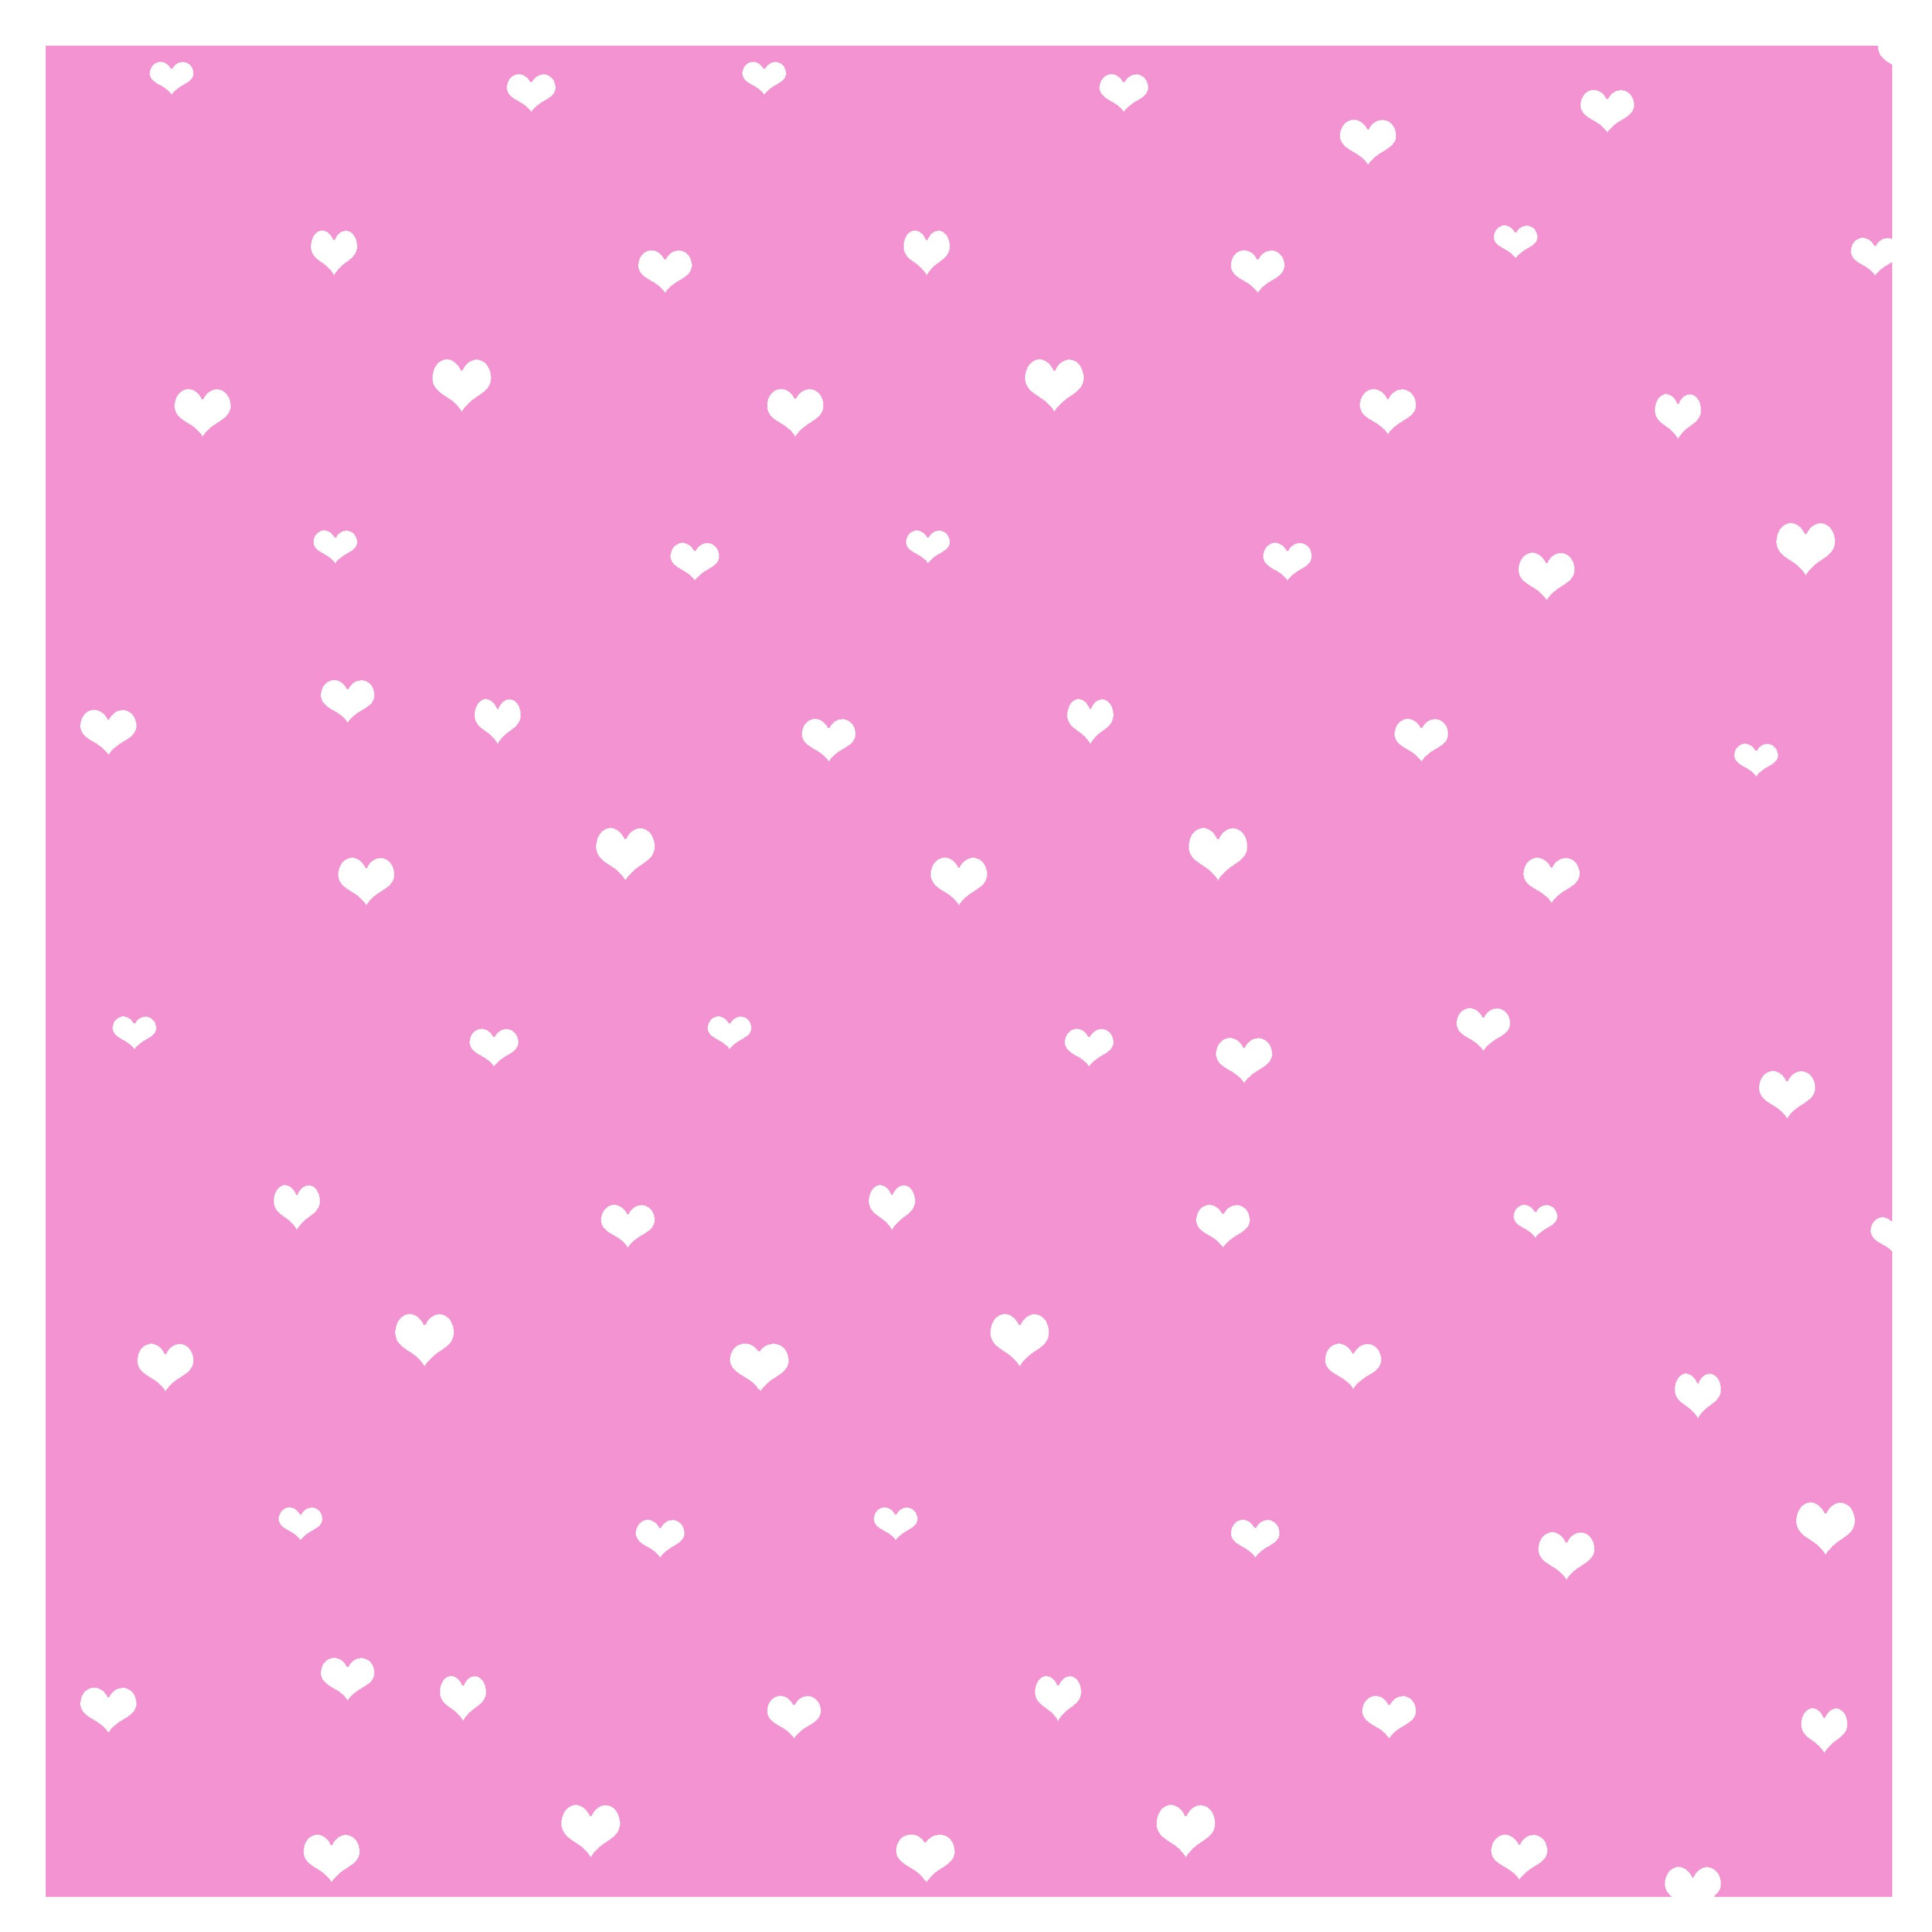 Displaying 16 Images For   Baby Pink Hearts Background 3300x3300